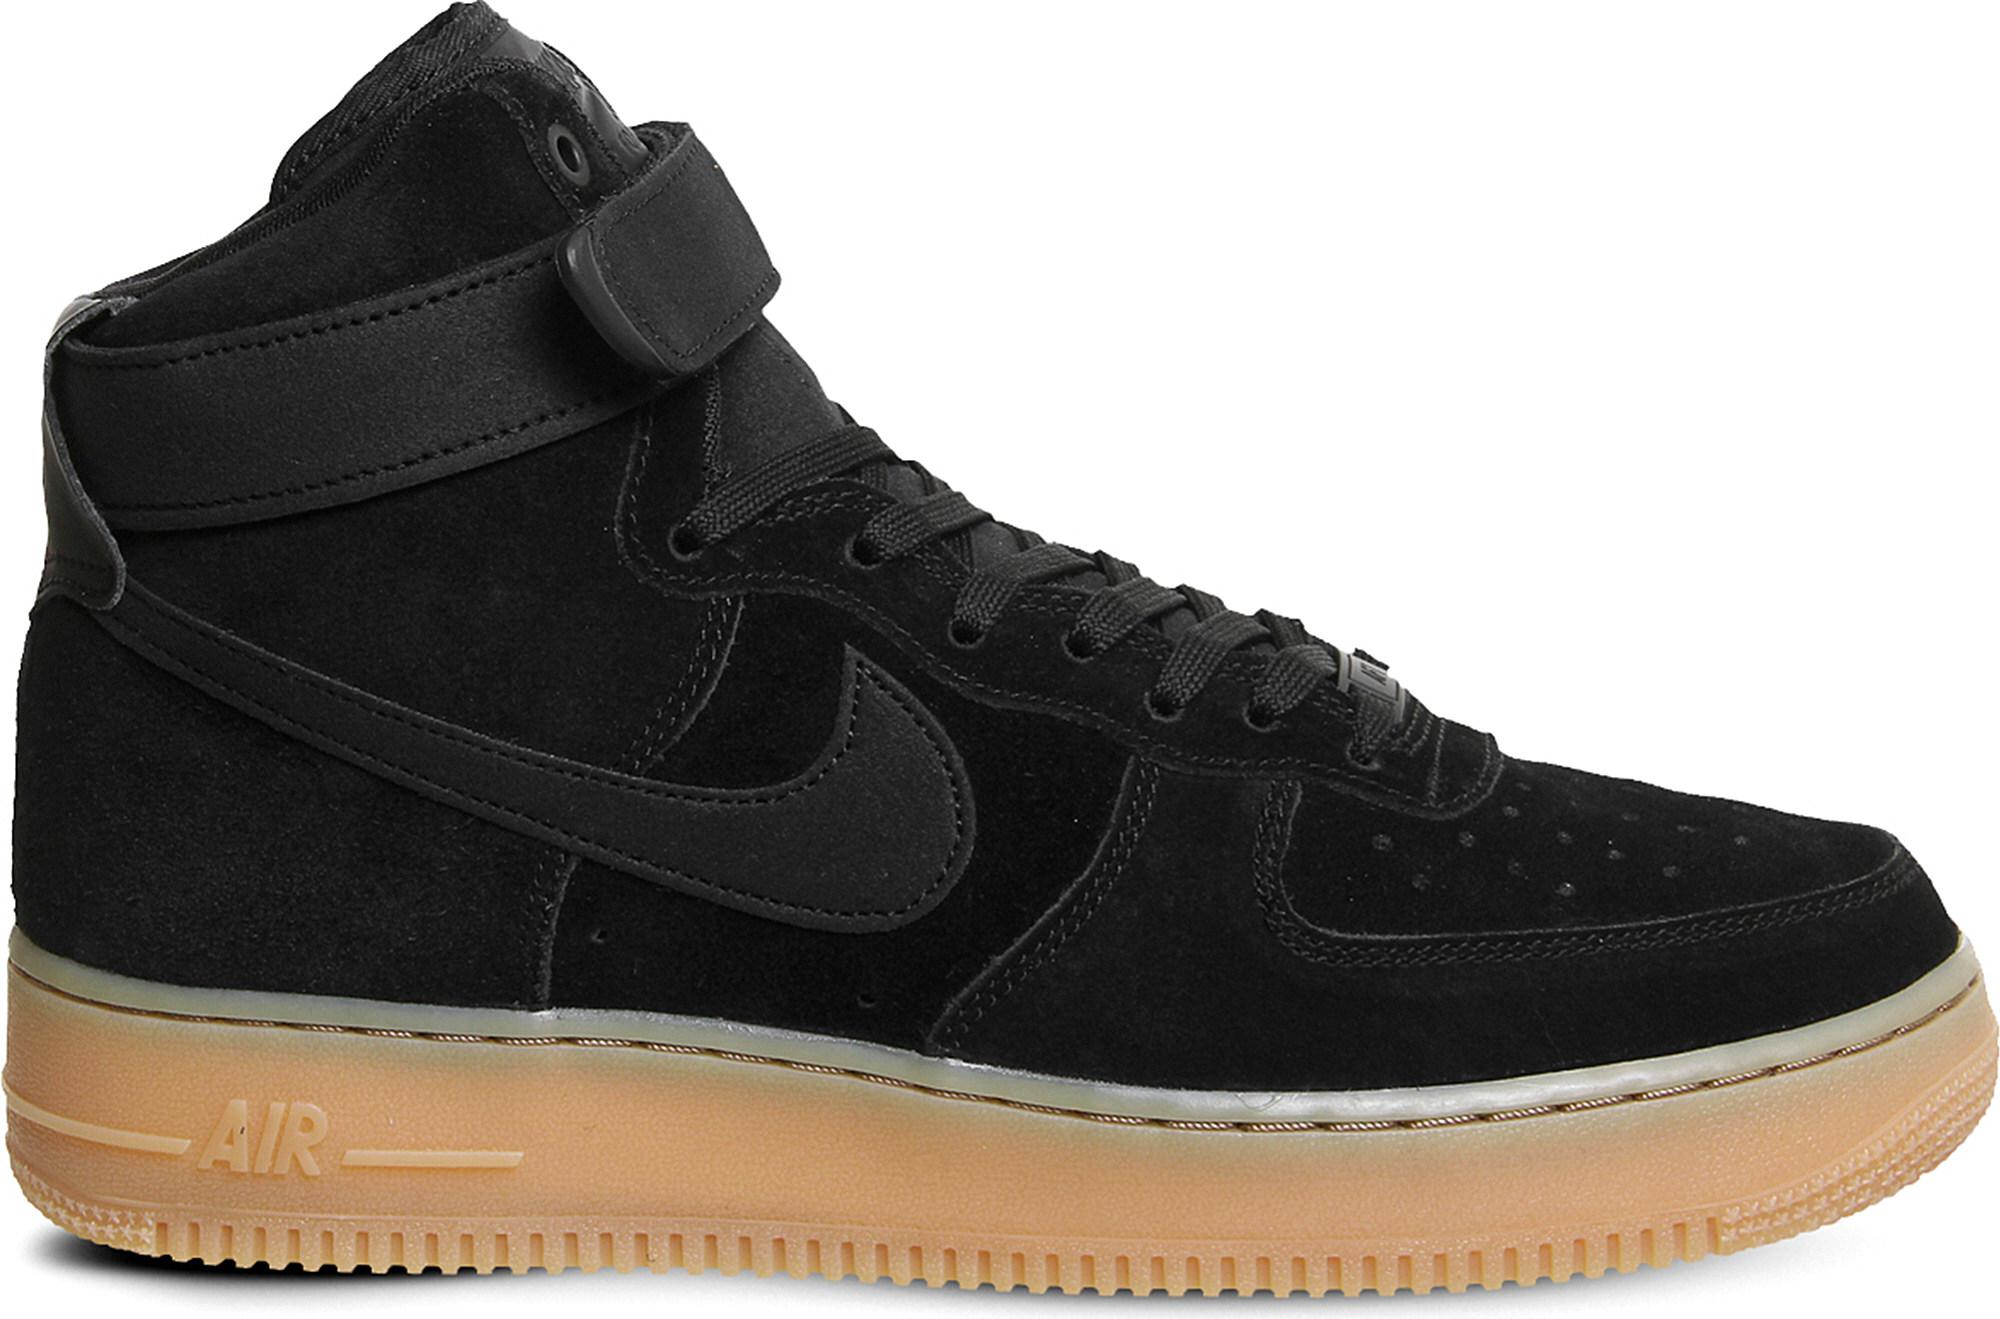 Air Force One Suede Black - Airforce Military